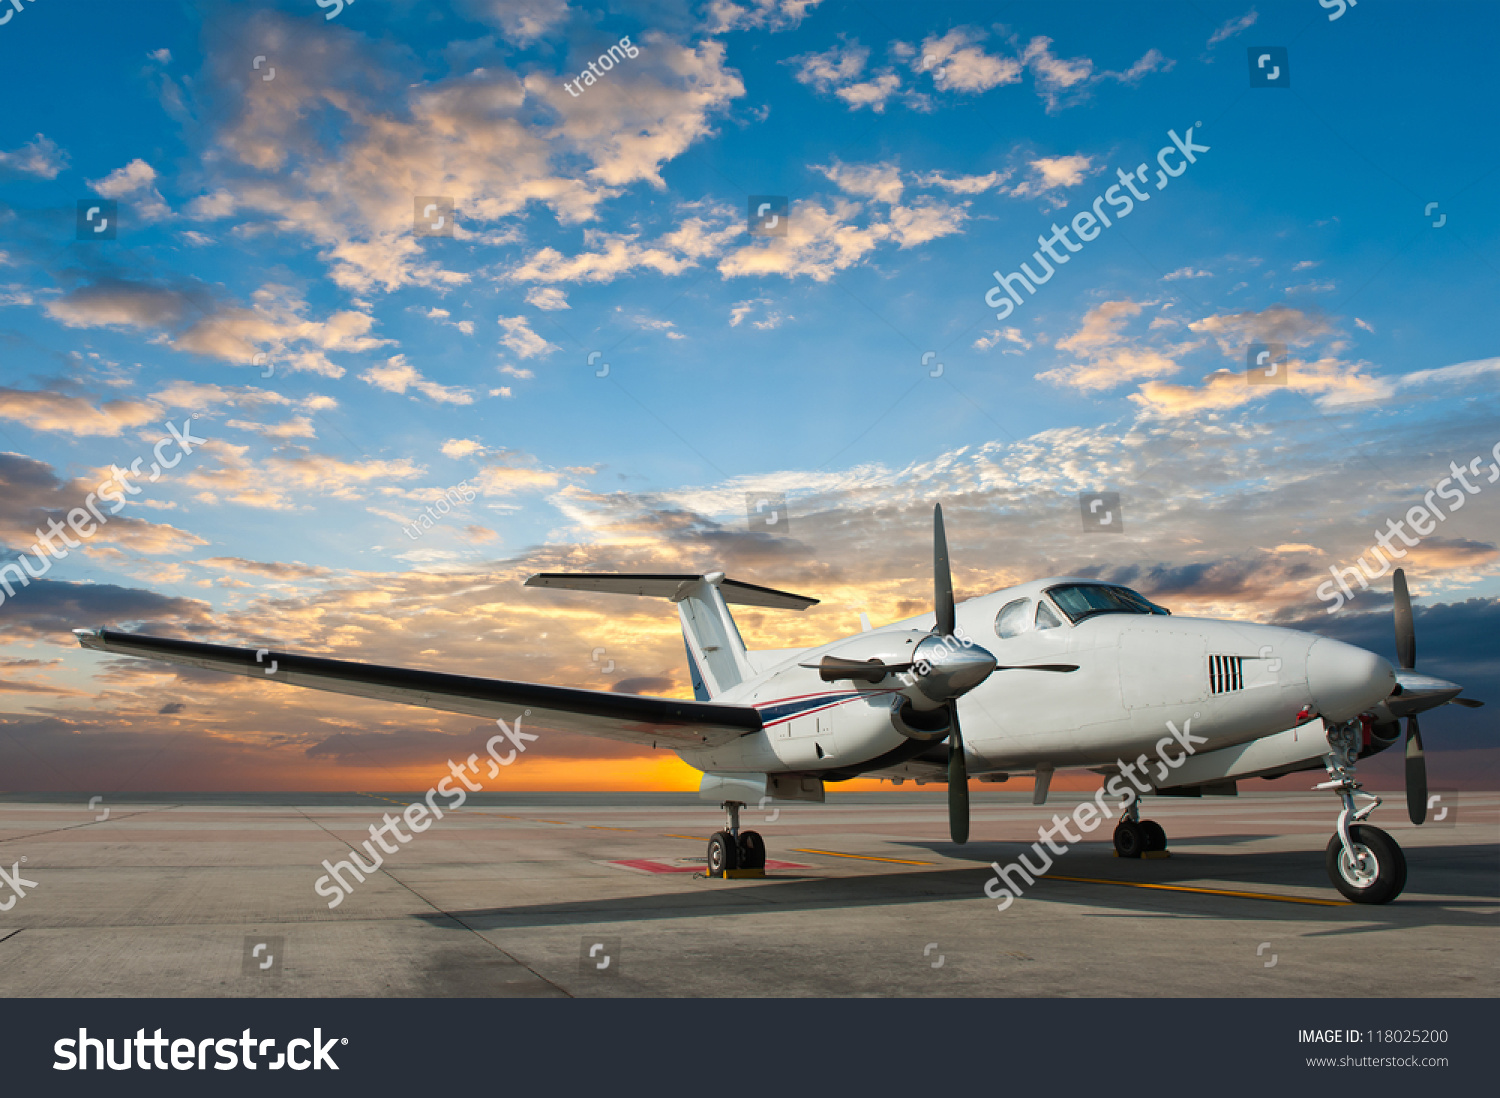 Propeller plane parking at the airport #118025200